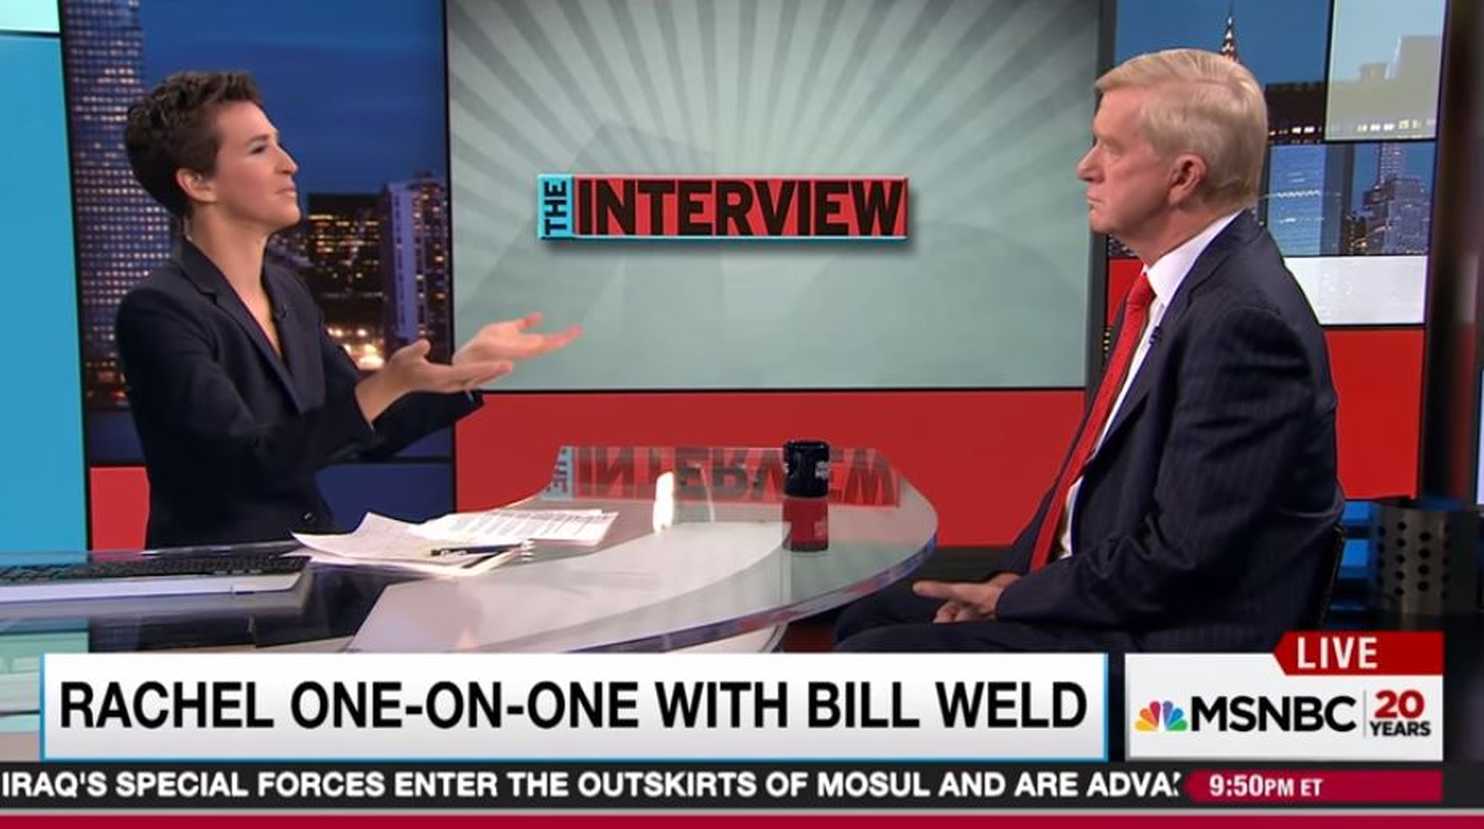 Bill Weld vouching for Hillary Clinton one week before running against her. ||| MSNBC